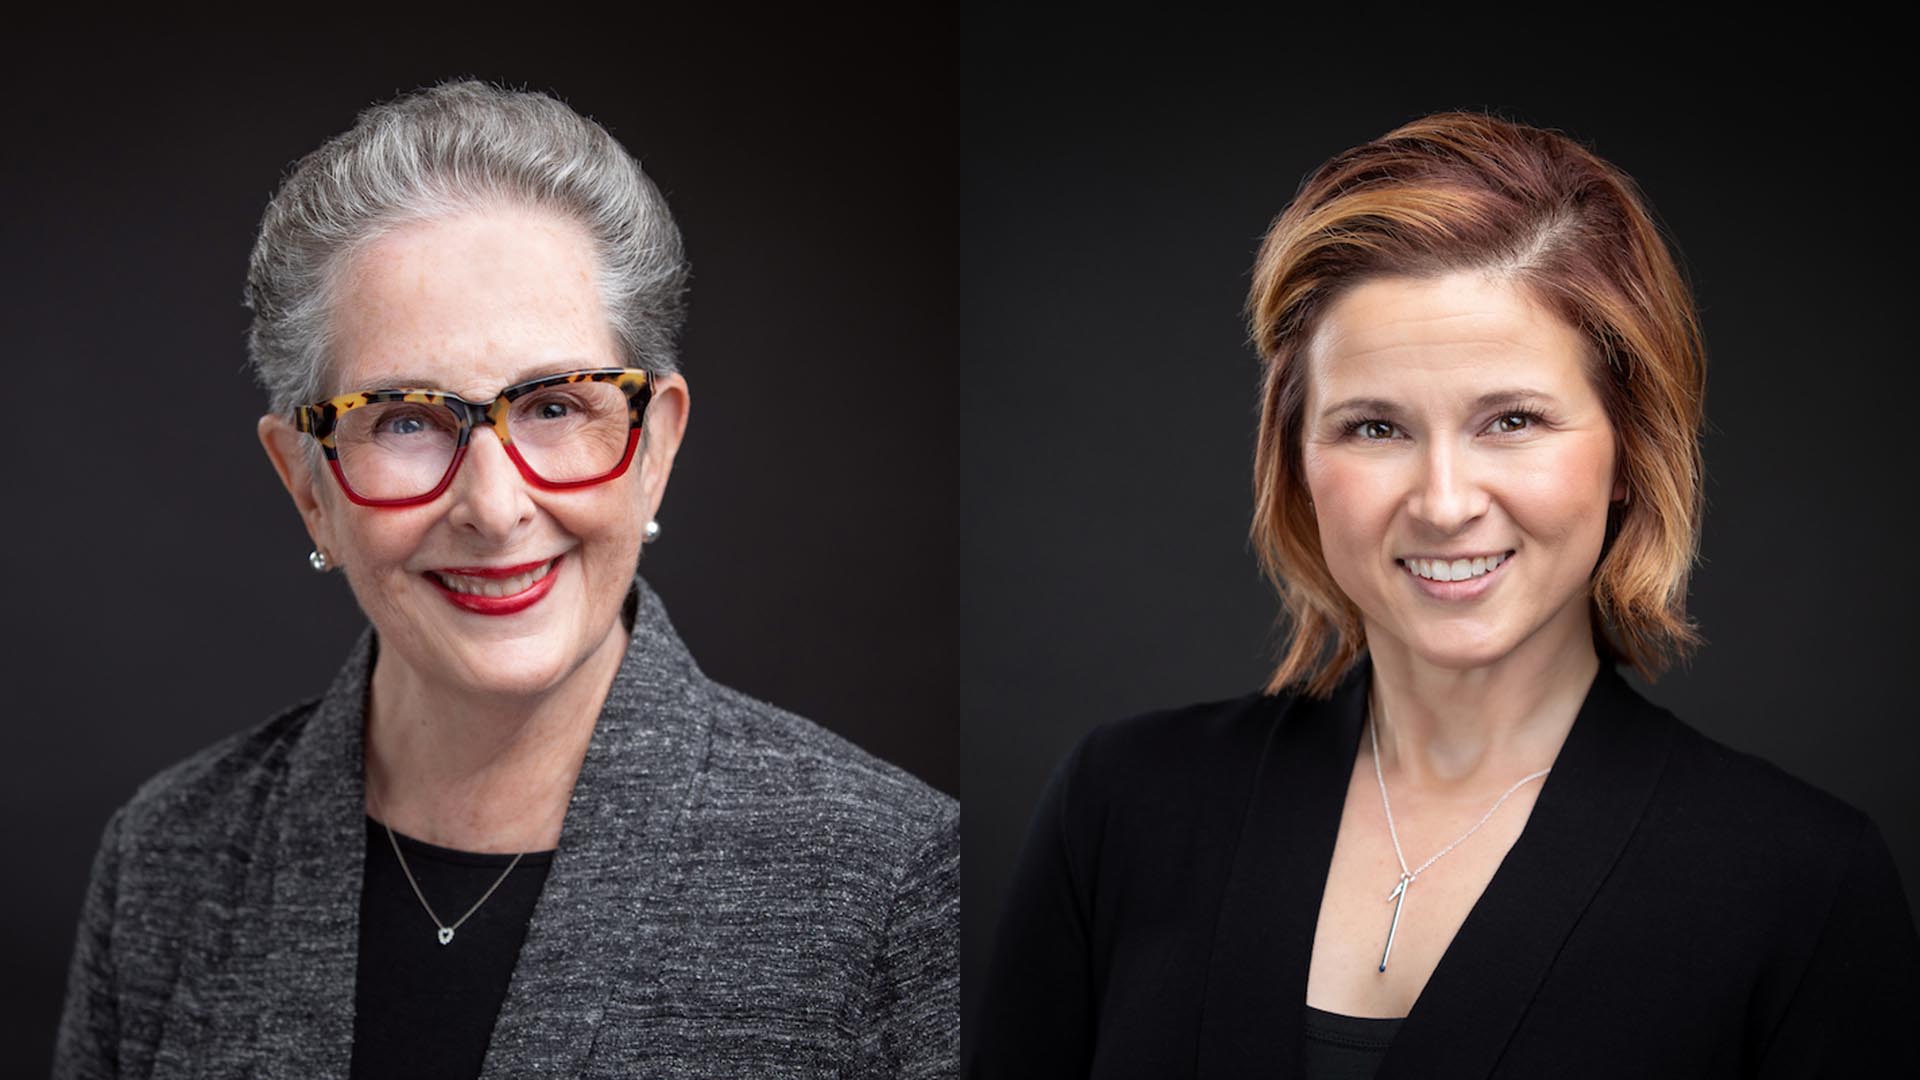 MSU Social Work Associate Professors Smith-Darden & McCauley Receive $100,000 from the CDC for a Documentary Film on Community-Level Violence Prevention